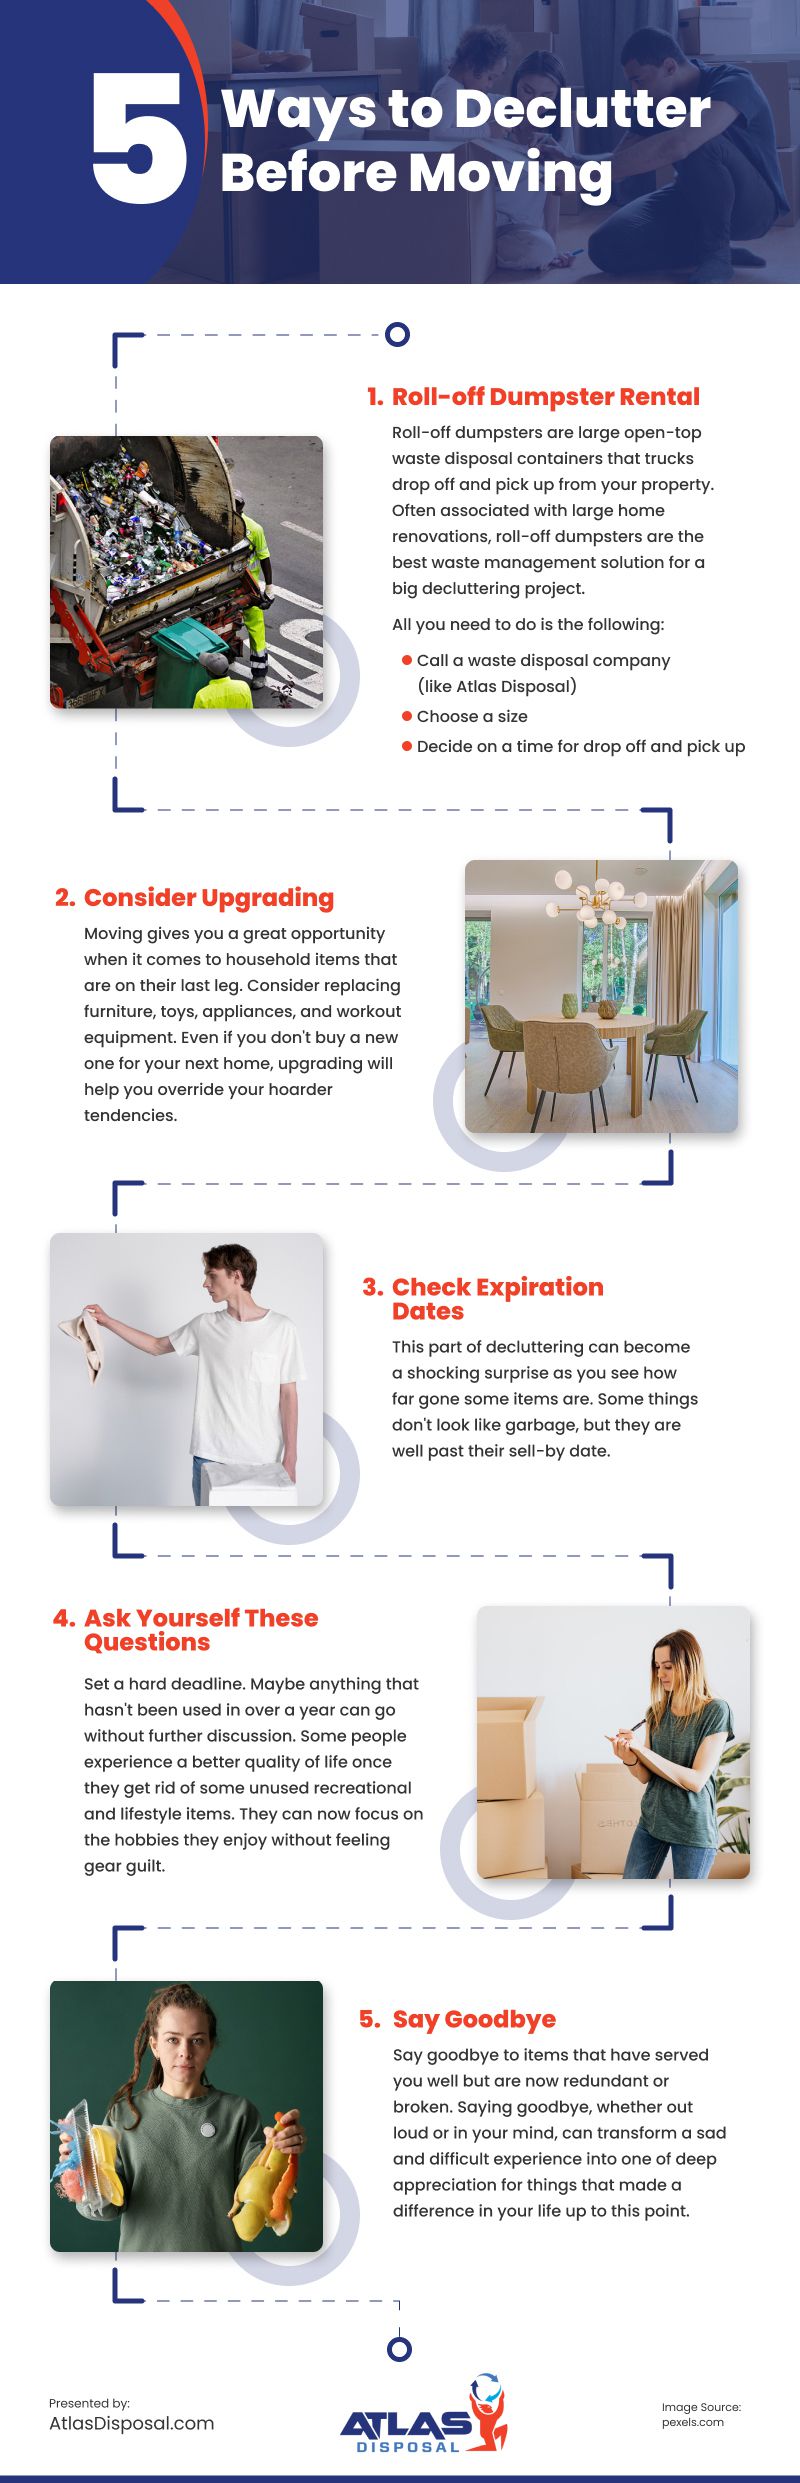 5 Ways to Declutter Before Moving Infographic